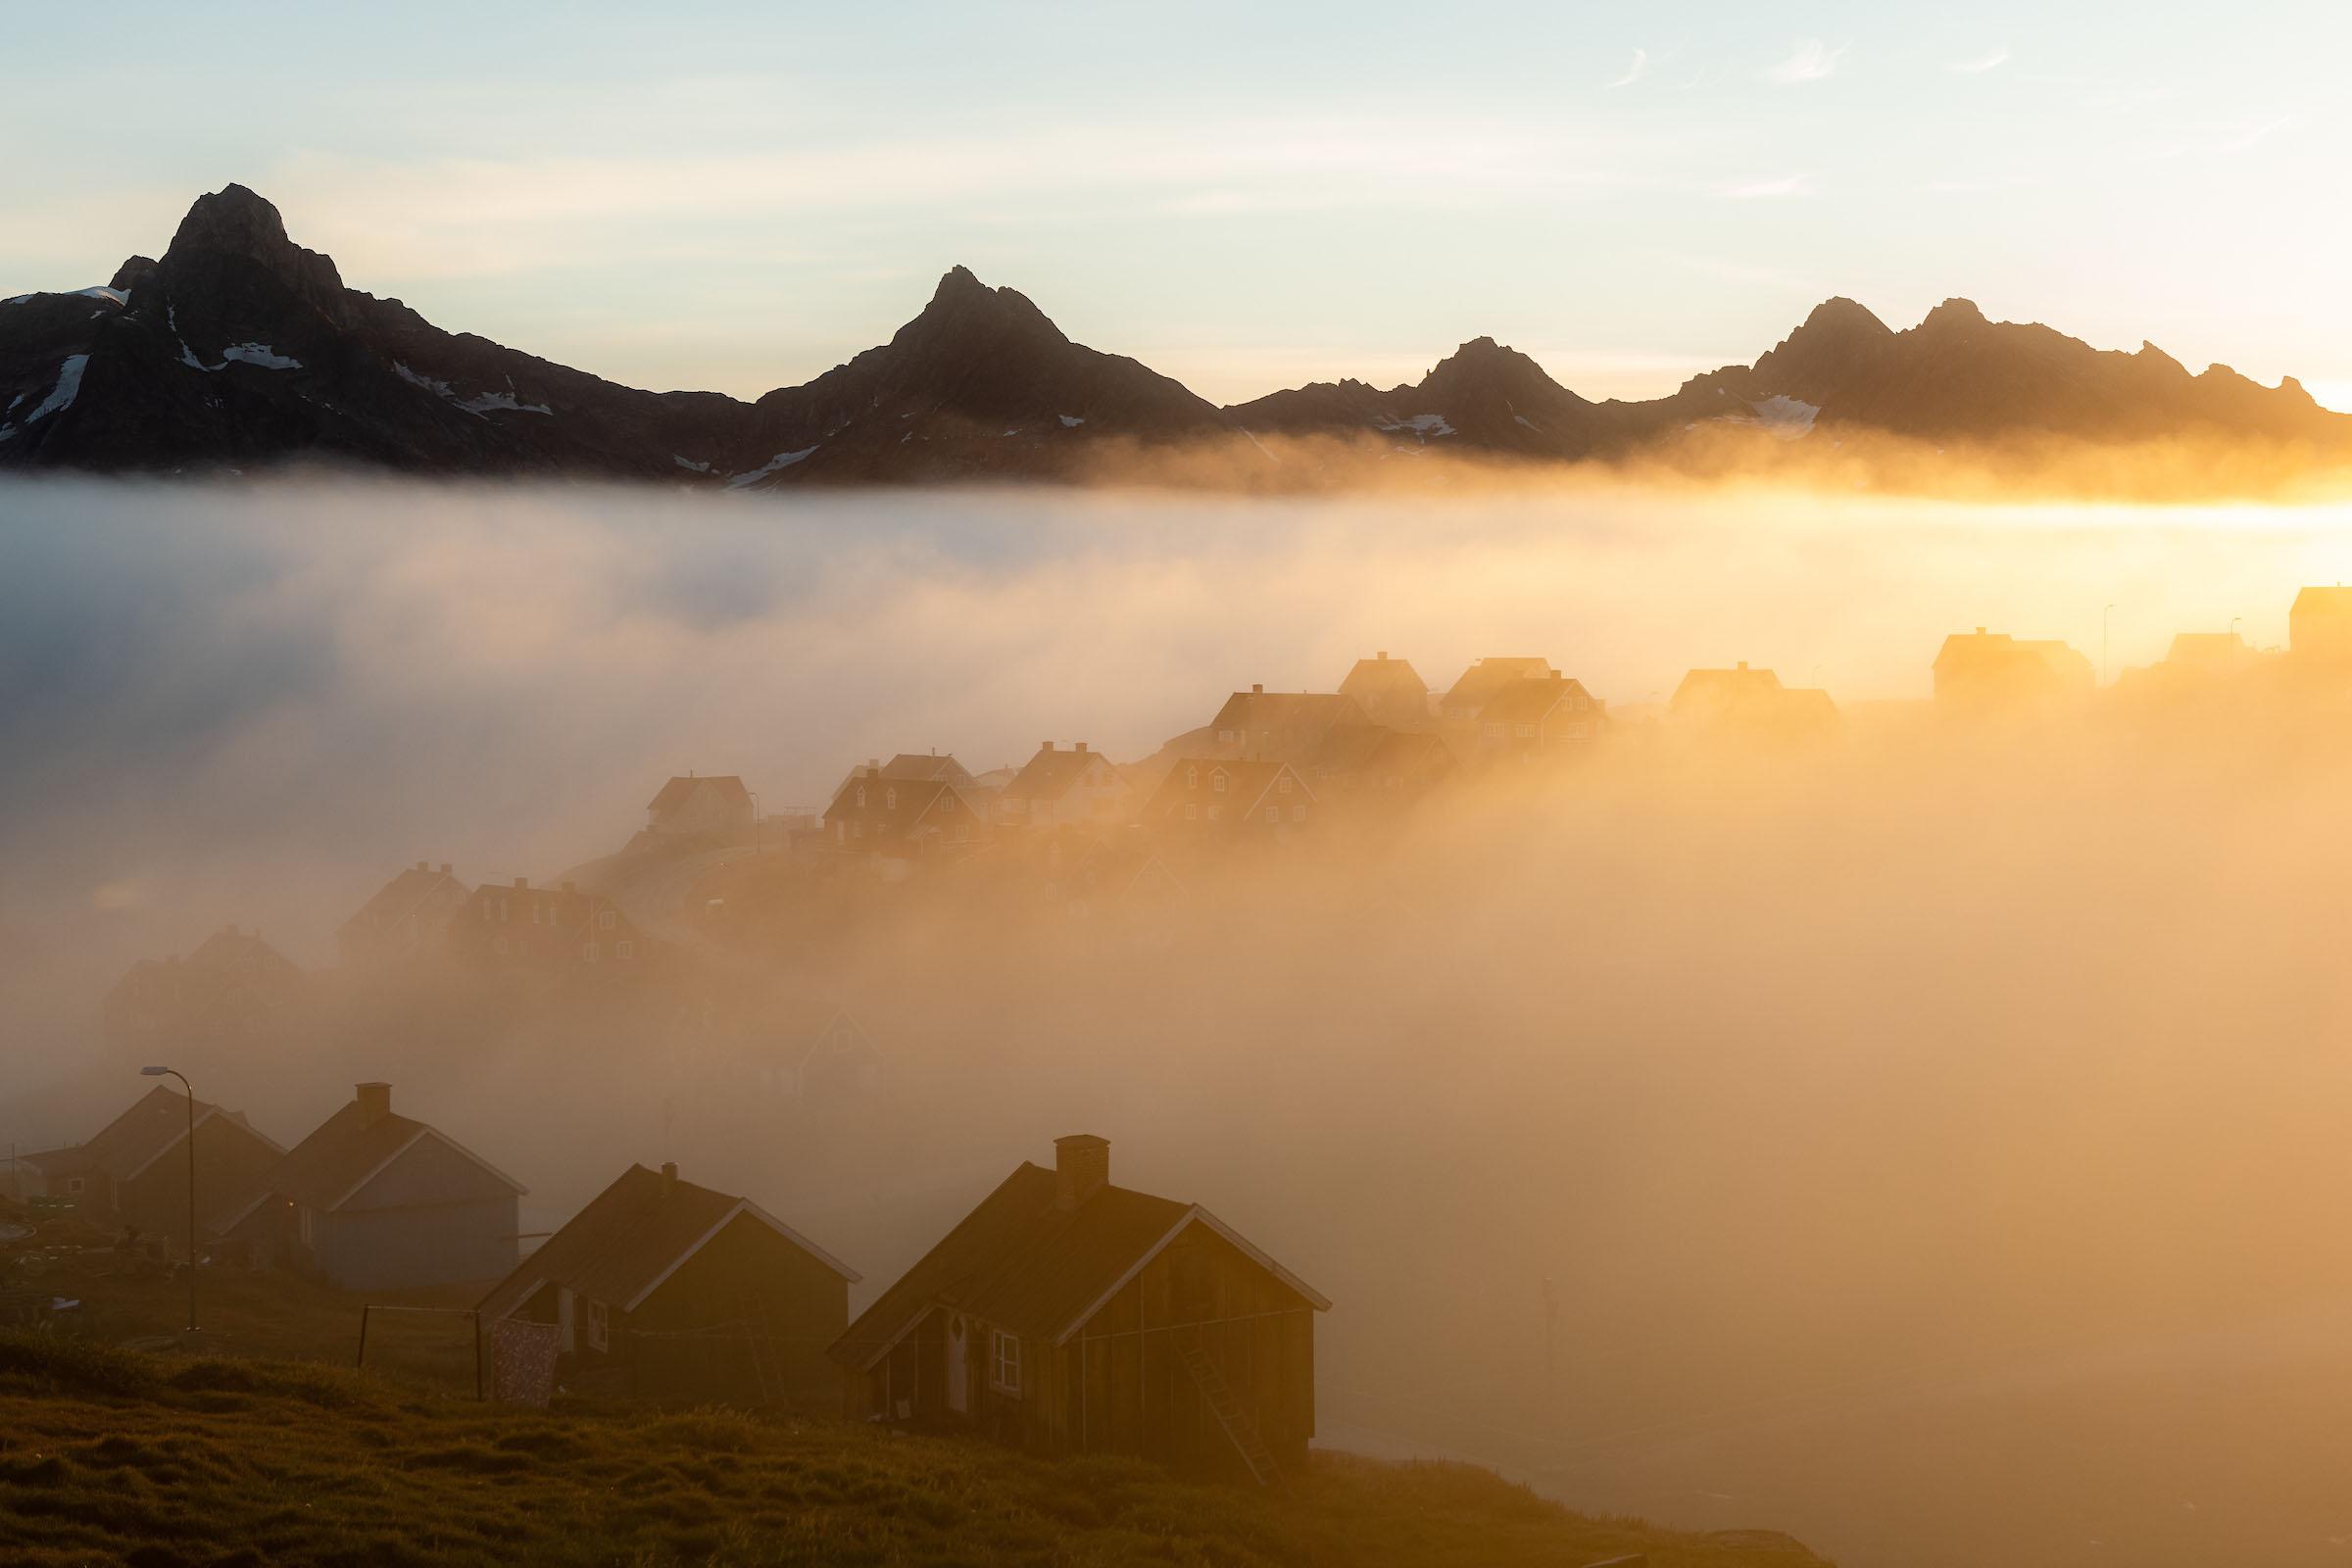 A morning from the books in Tasiilaq. - Photo by Philipp Mitterlehner - Visit Greenland